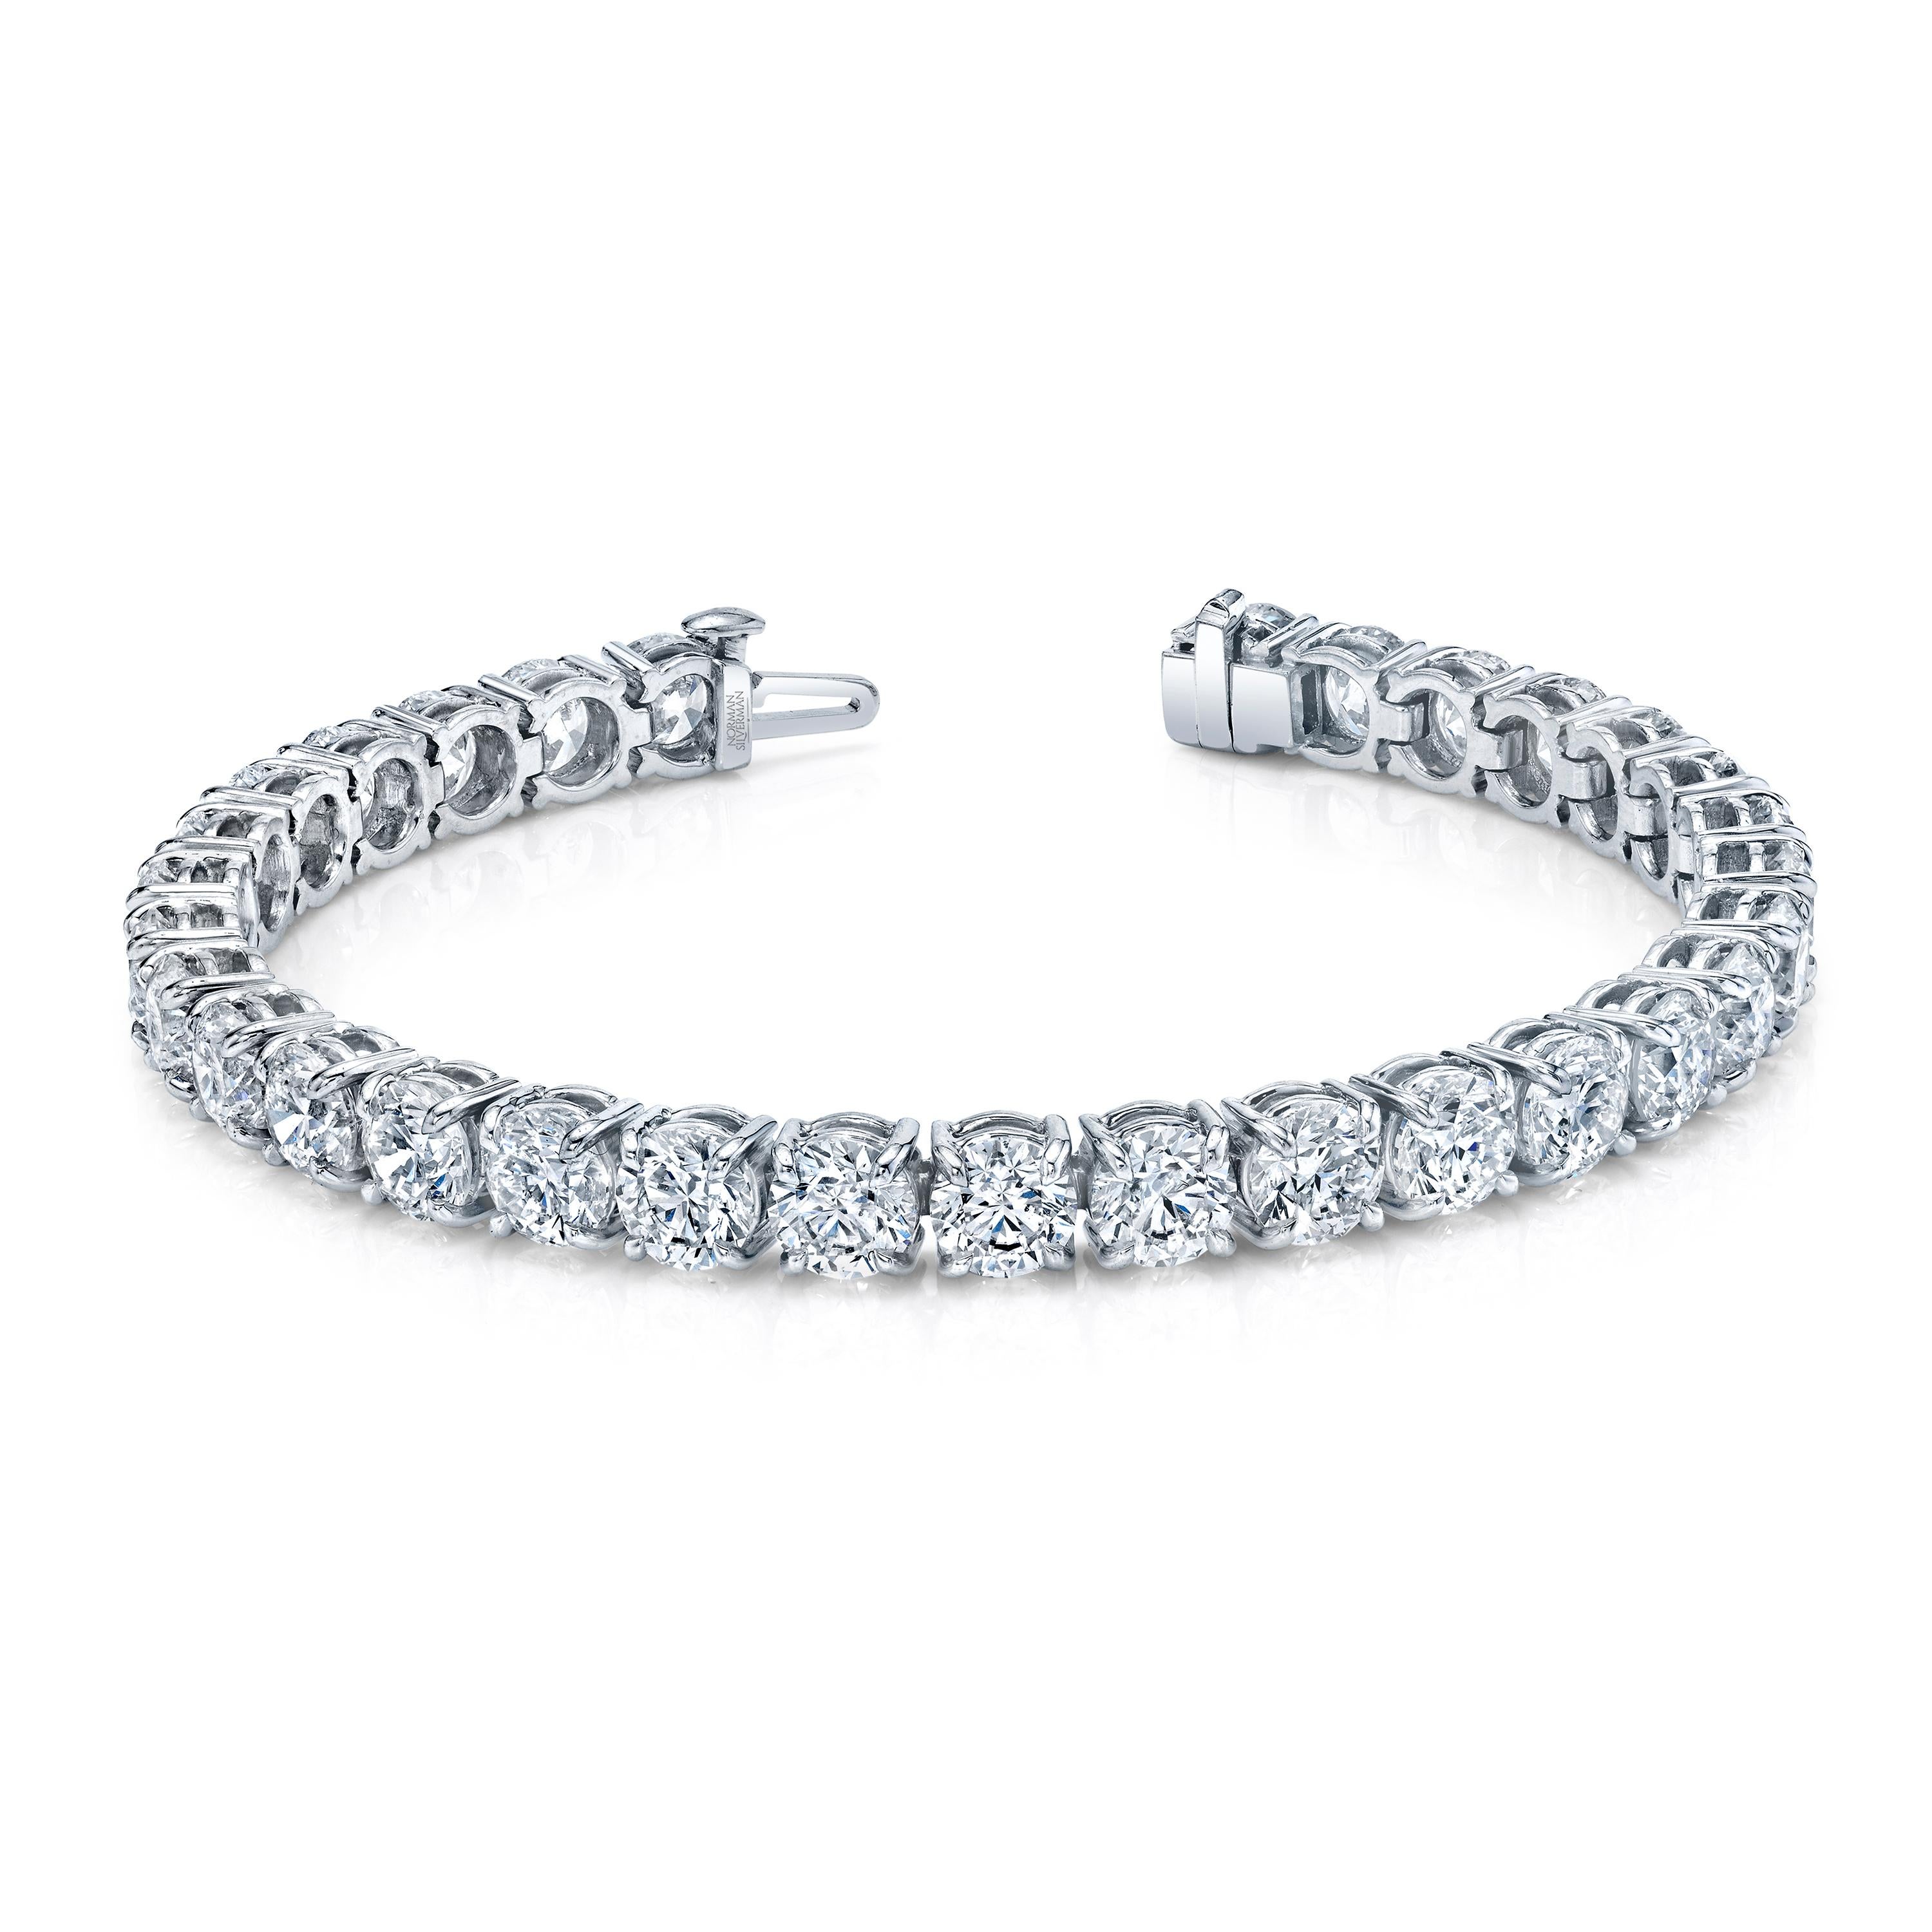 Straight Line 18k white gold bracelet with 31 round brilliant cut diamonds with a total weight of 21.92 carats.
Approximate Color G - H  Clarity  VSS1  
7 inches long
